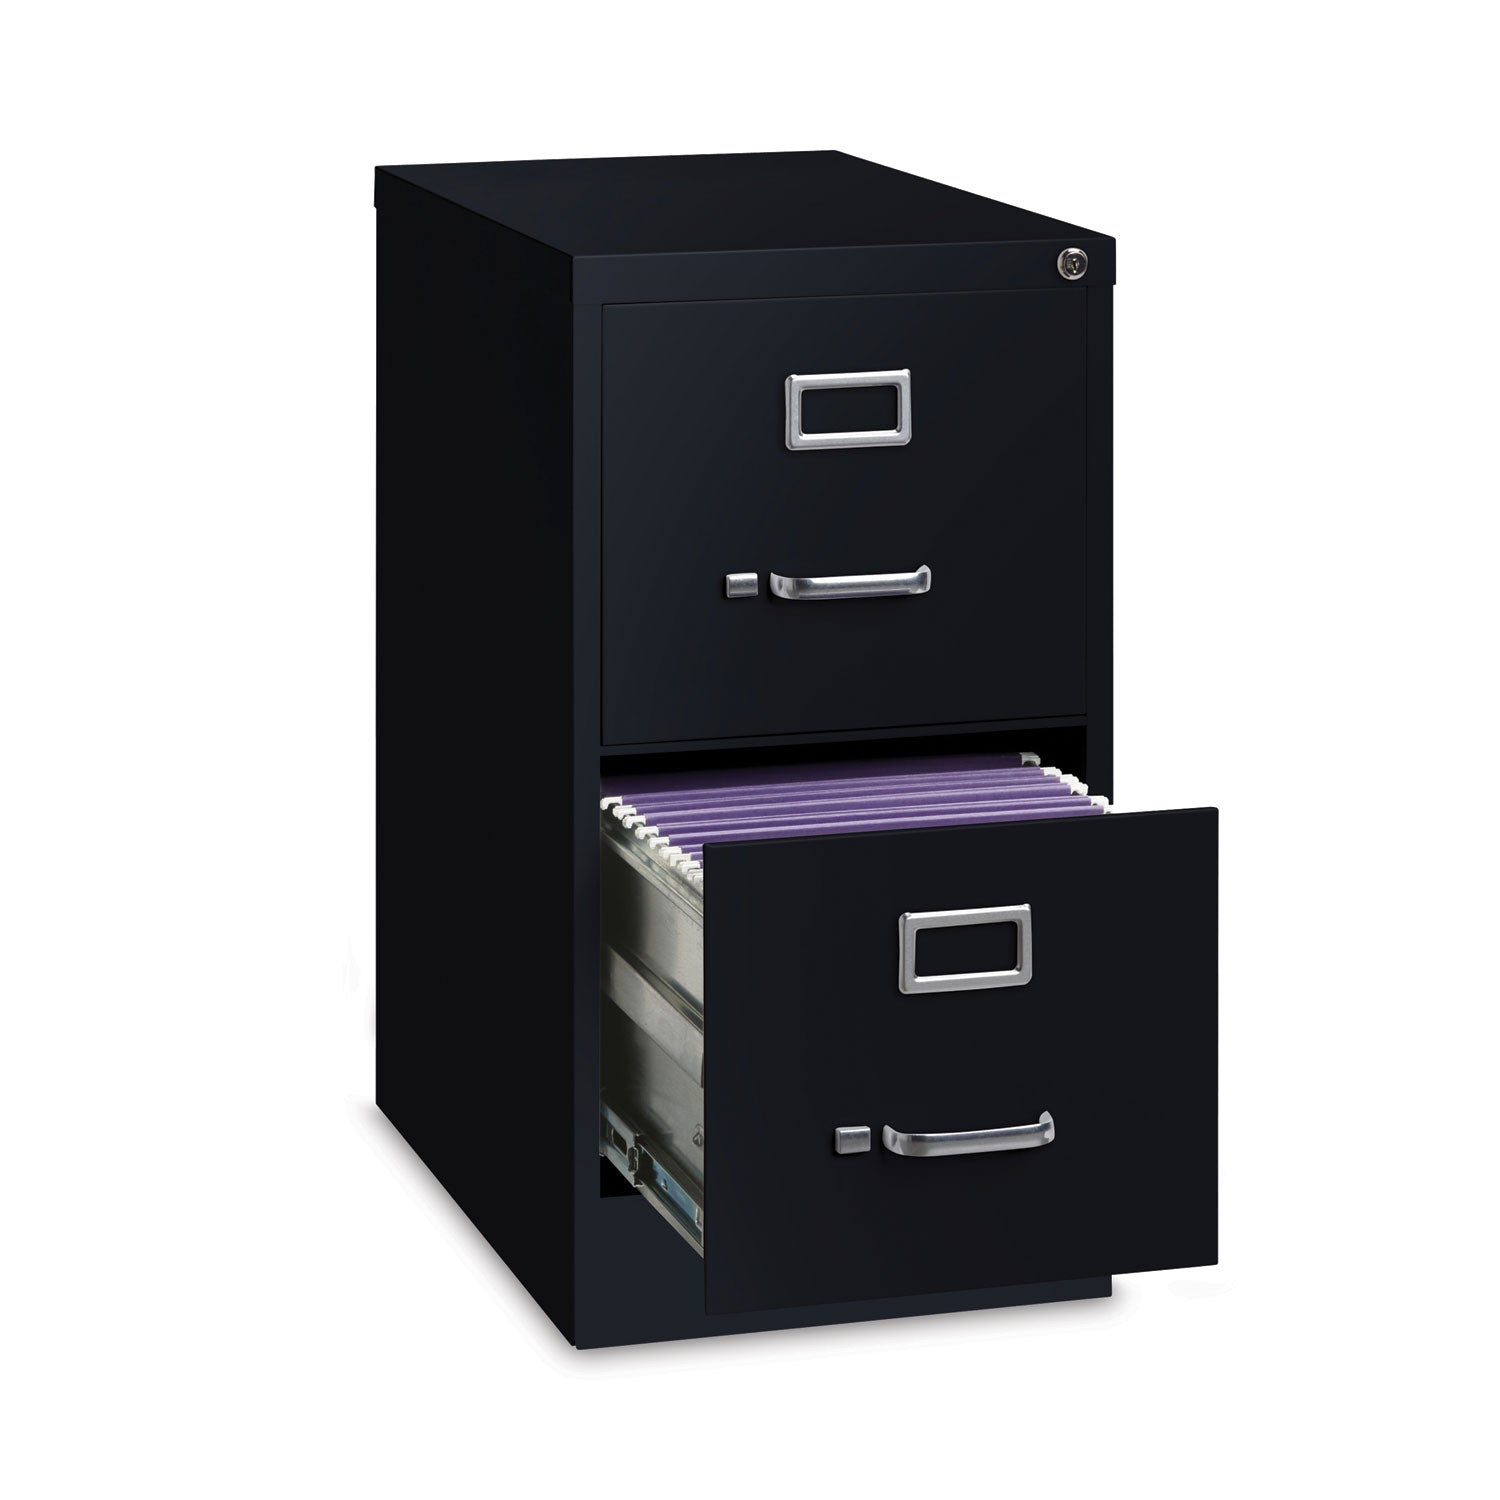 vertical-letter-file-cabinet-2-letter-size-file-drawers-black-15-x-22-x-2837_hid17890 - 3